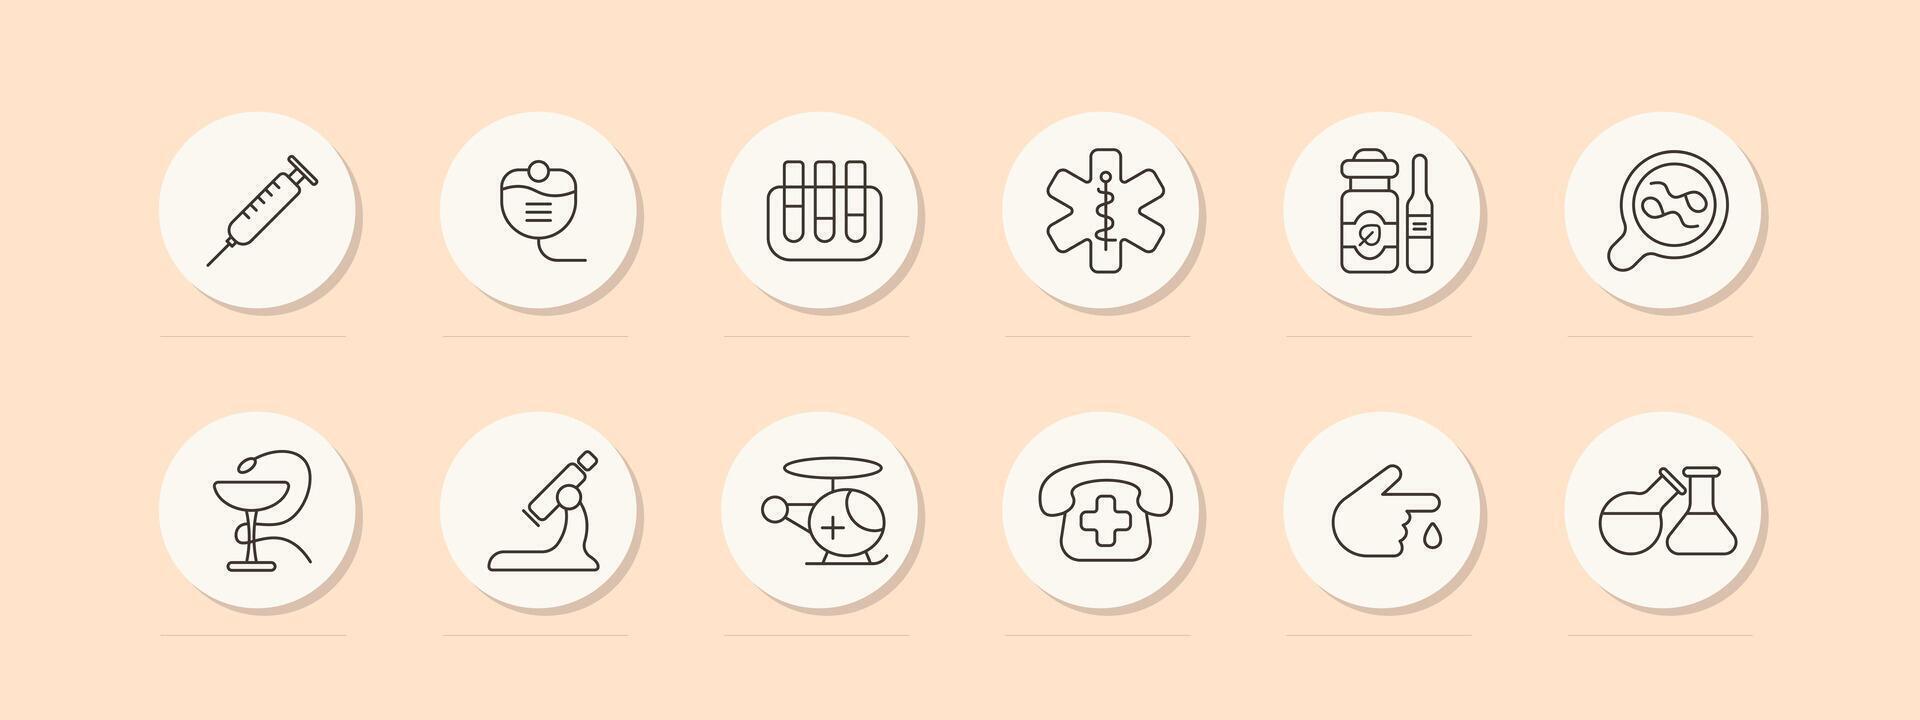 Medical equipment set icon. Glass, snake, goblet, telephone, cross, call an ambulance, microscope, magnifying glass, flask, container, dropper, health care. Medical care concept. line icon. vector